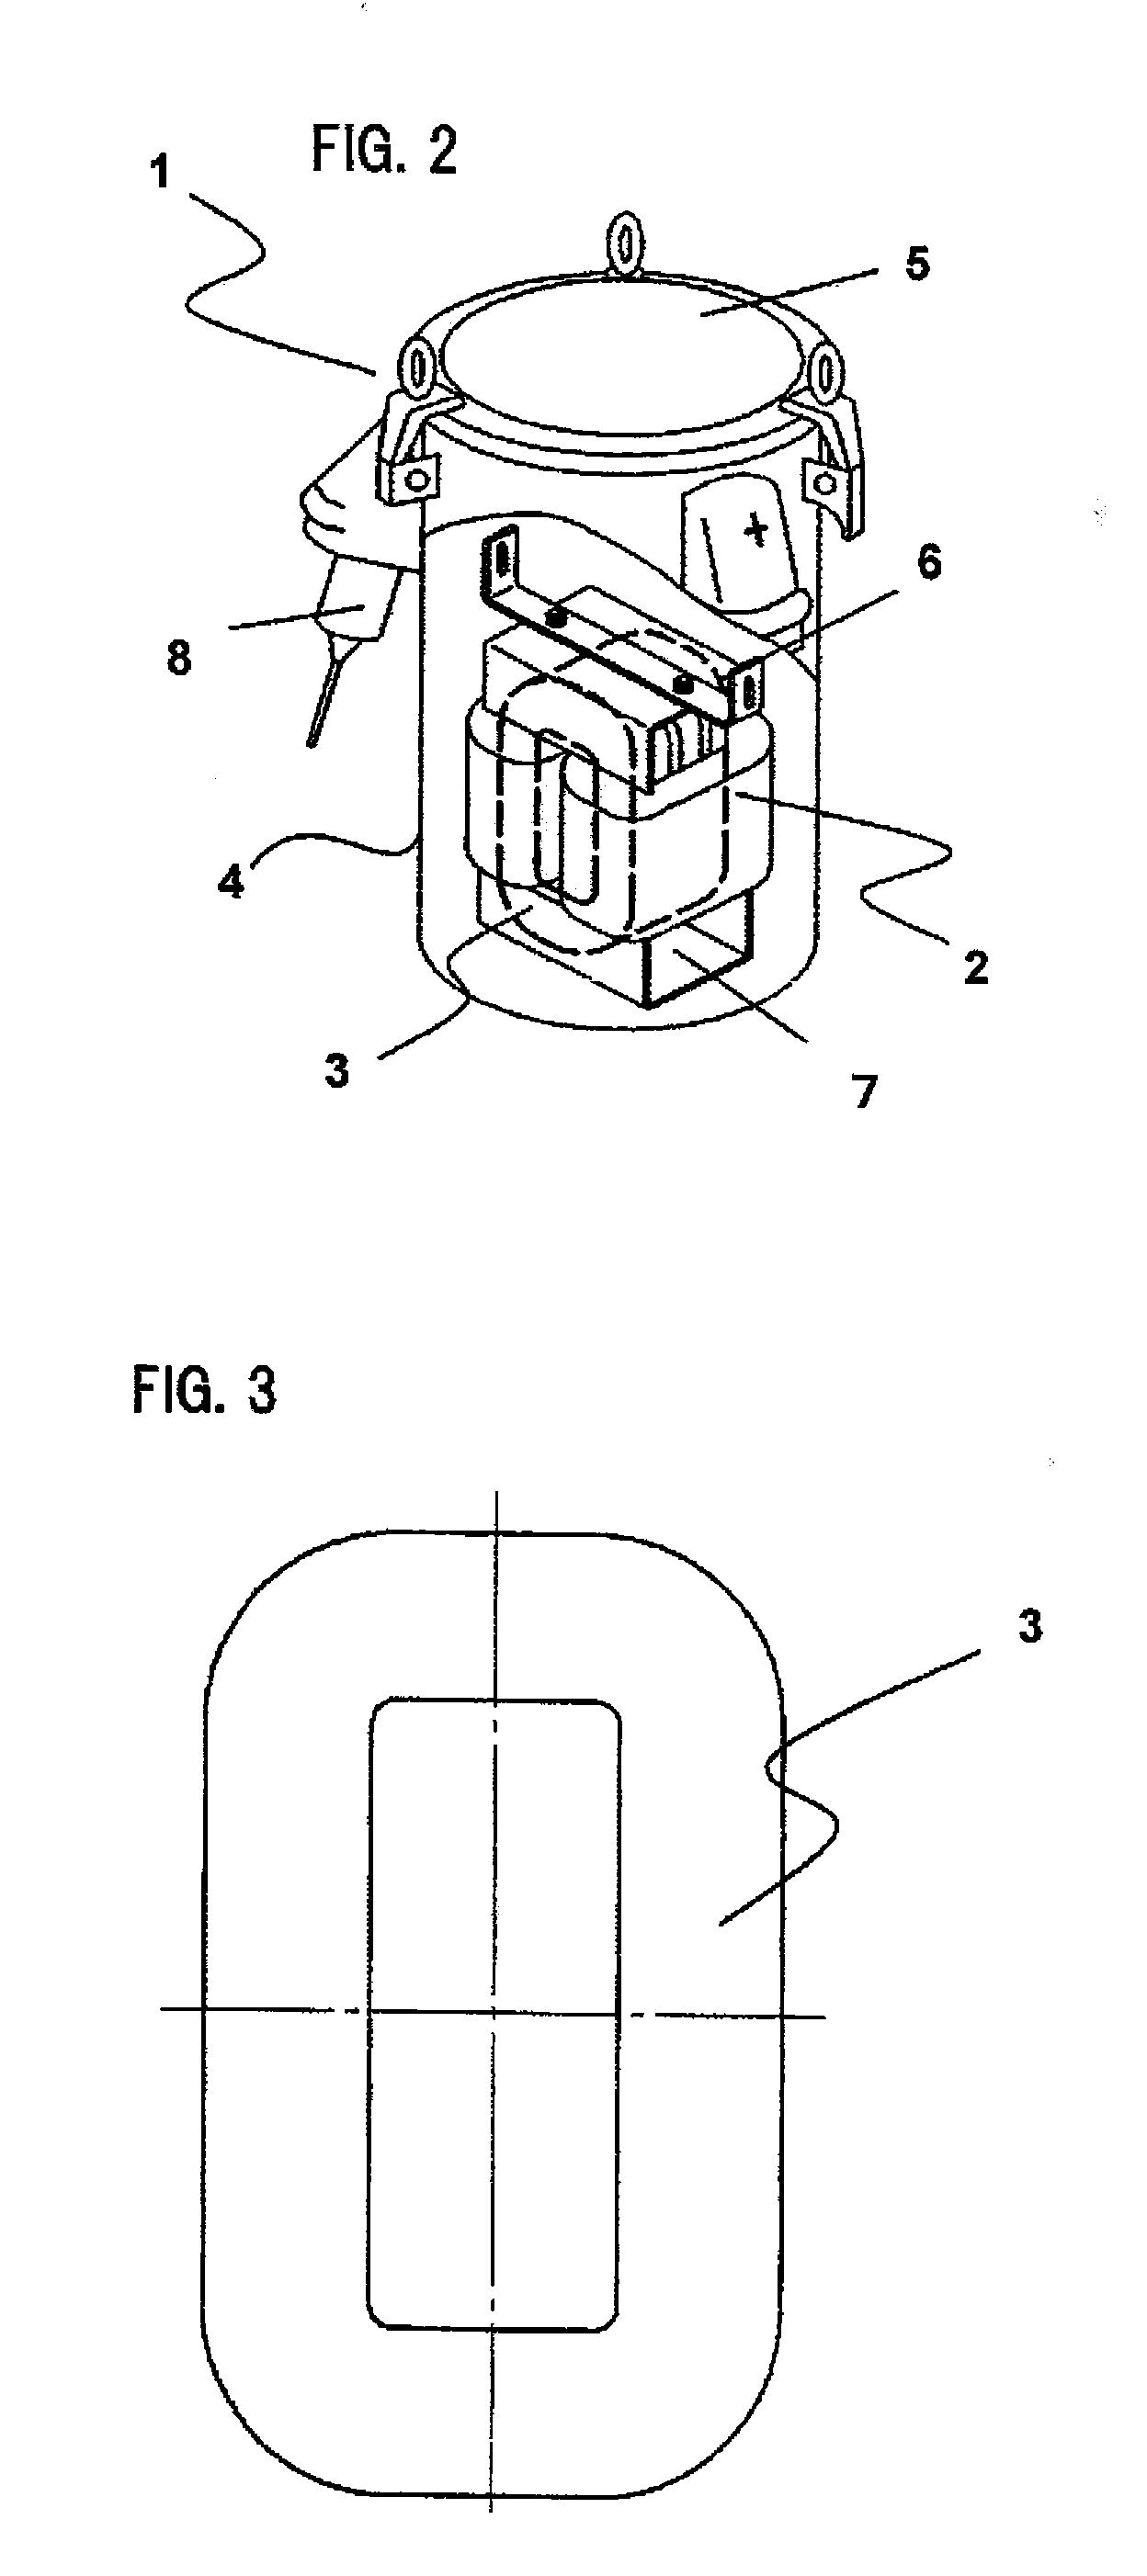 Wound iron core for static apparatus, amorphous transformer and coil winding frame for transformer